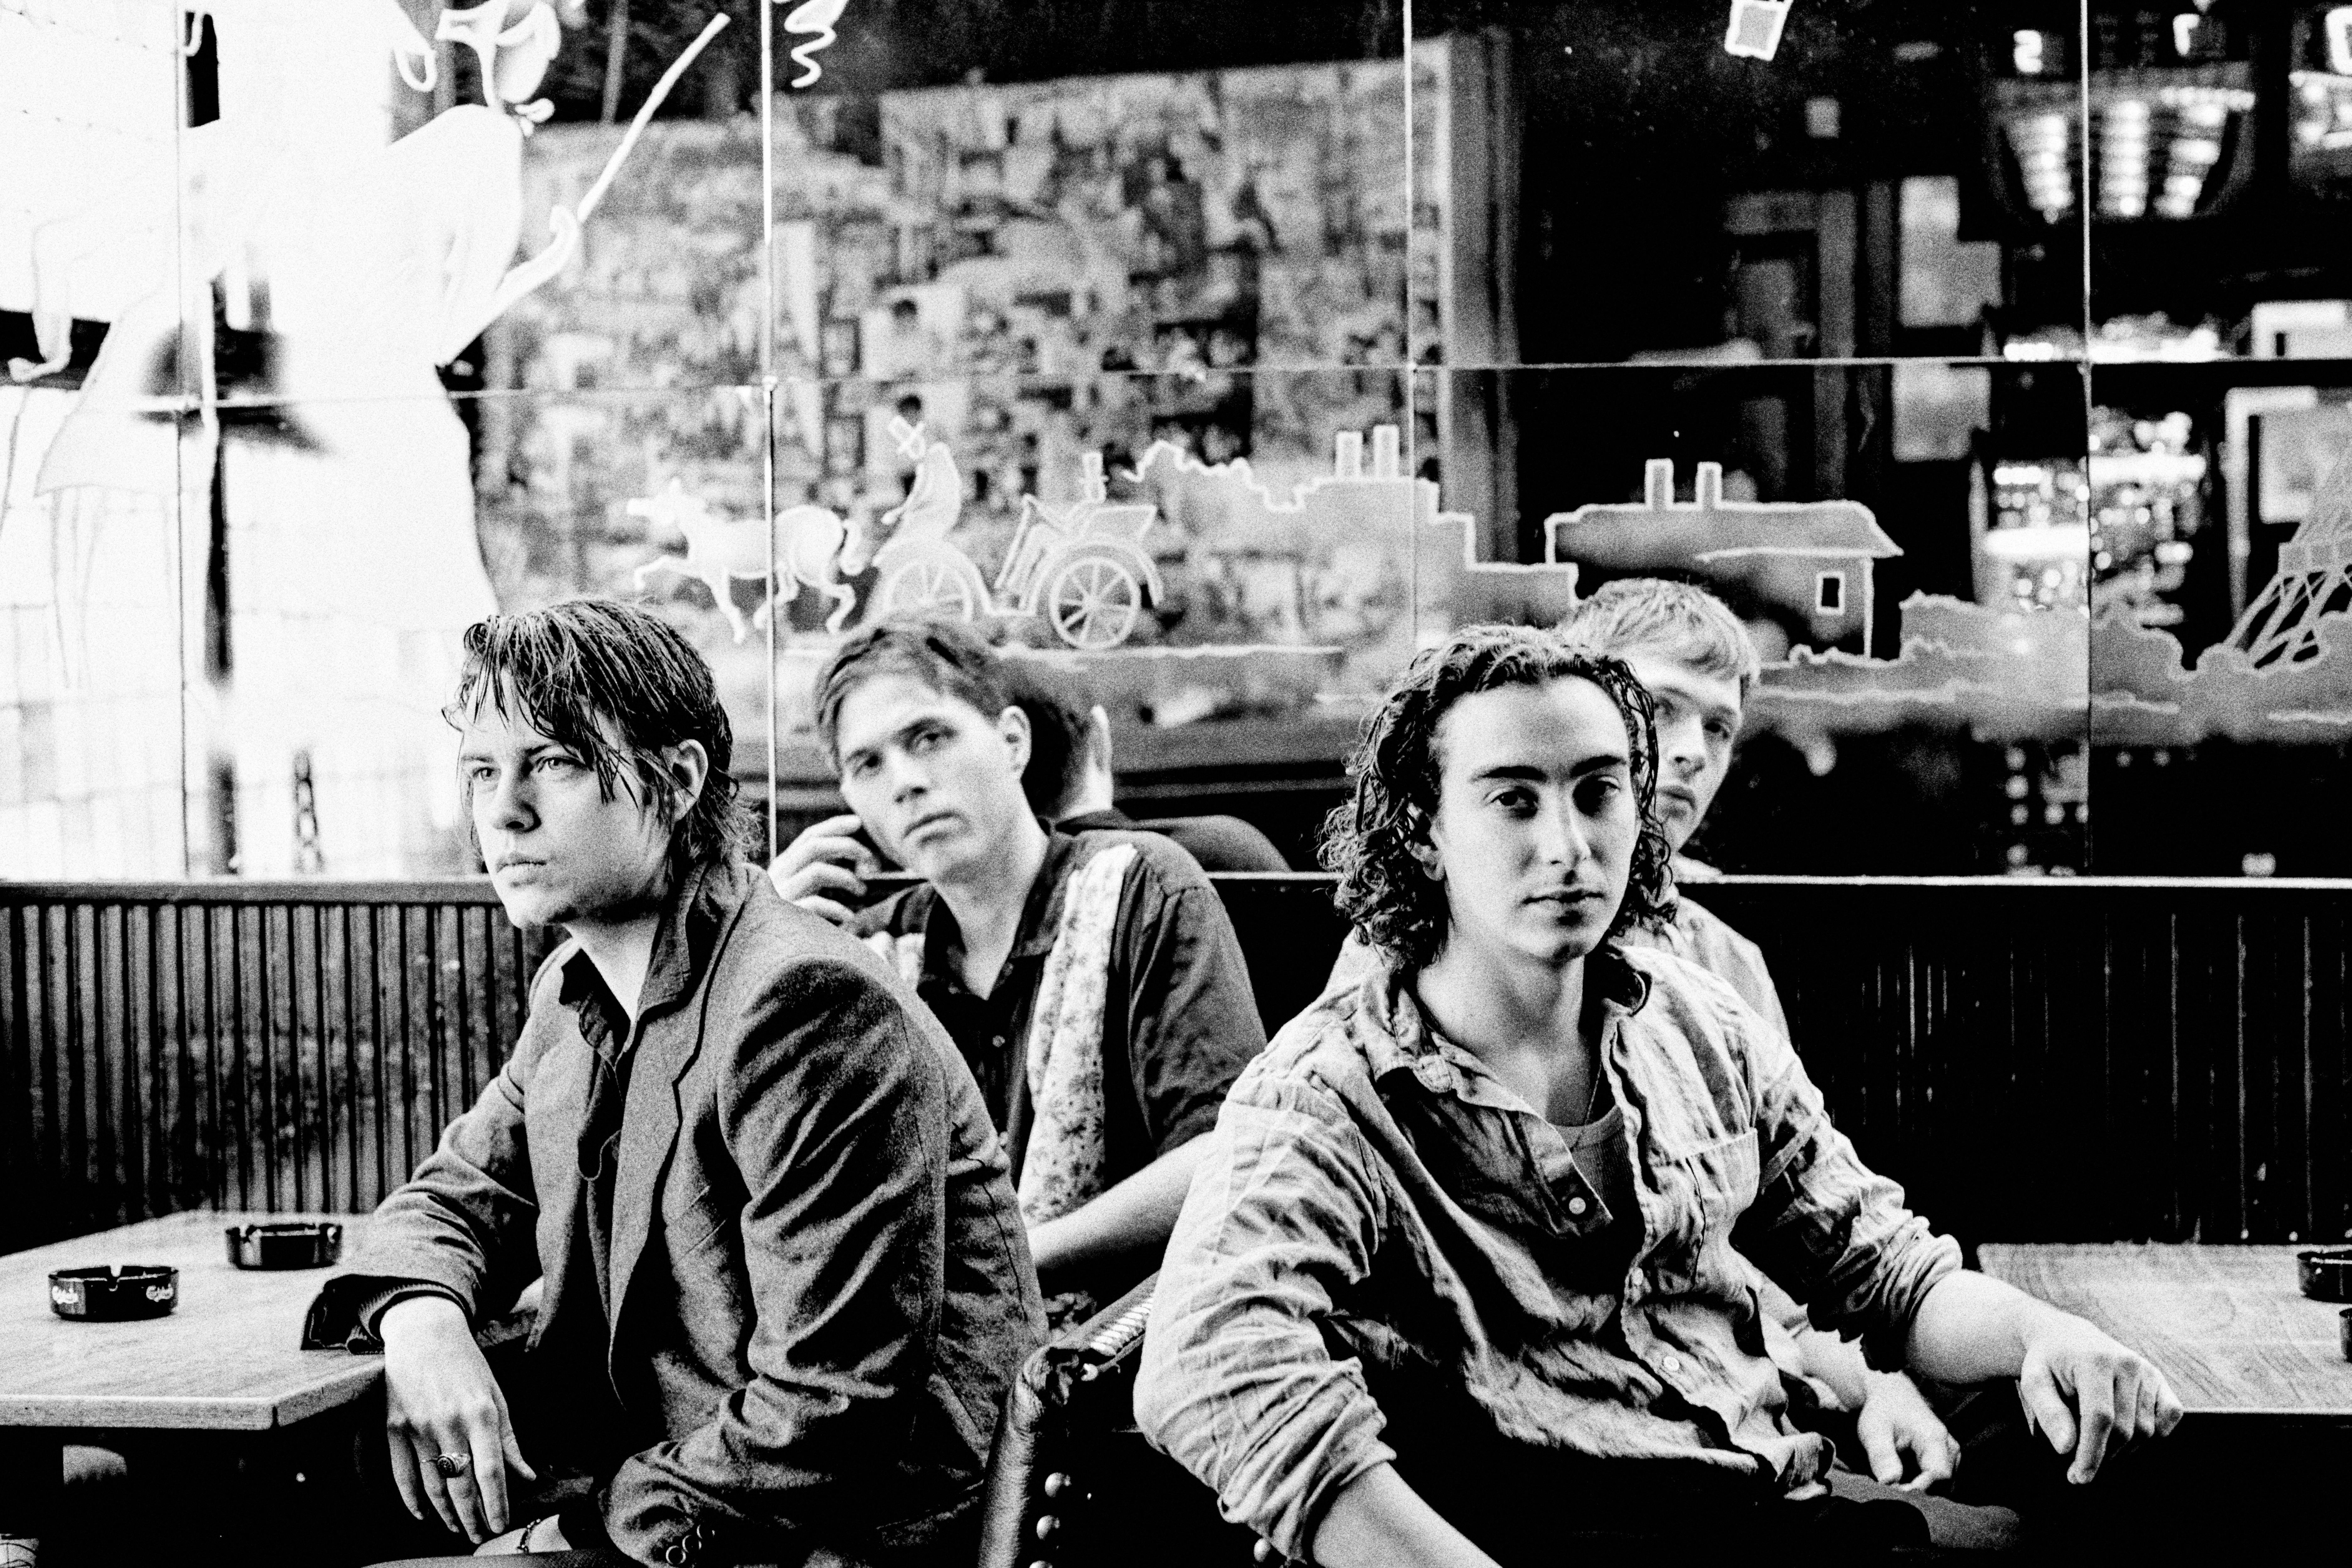 Iceage release new single "Take it All", the band begin their spring tour, tonight in Brooklyn, NY.